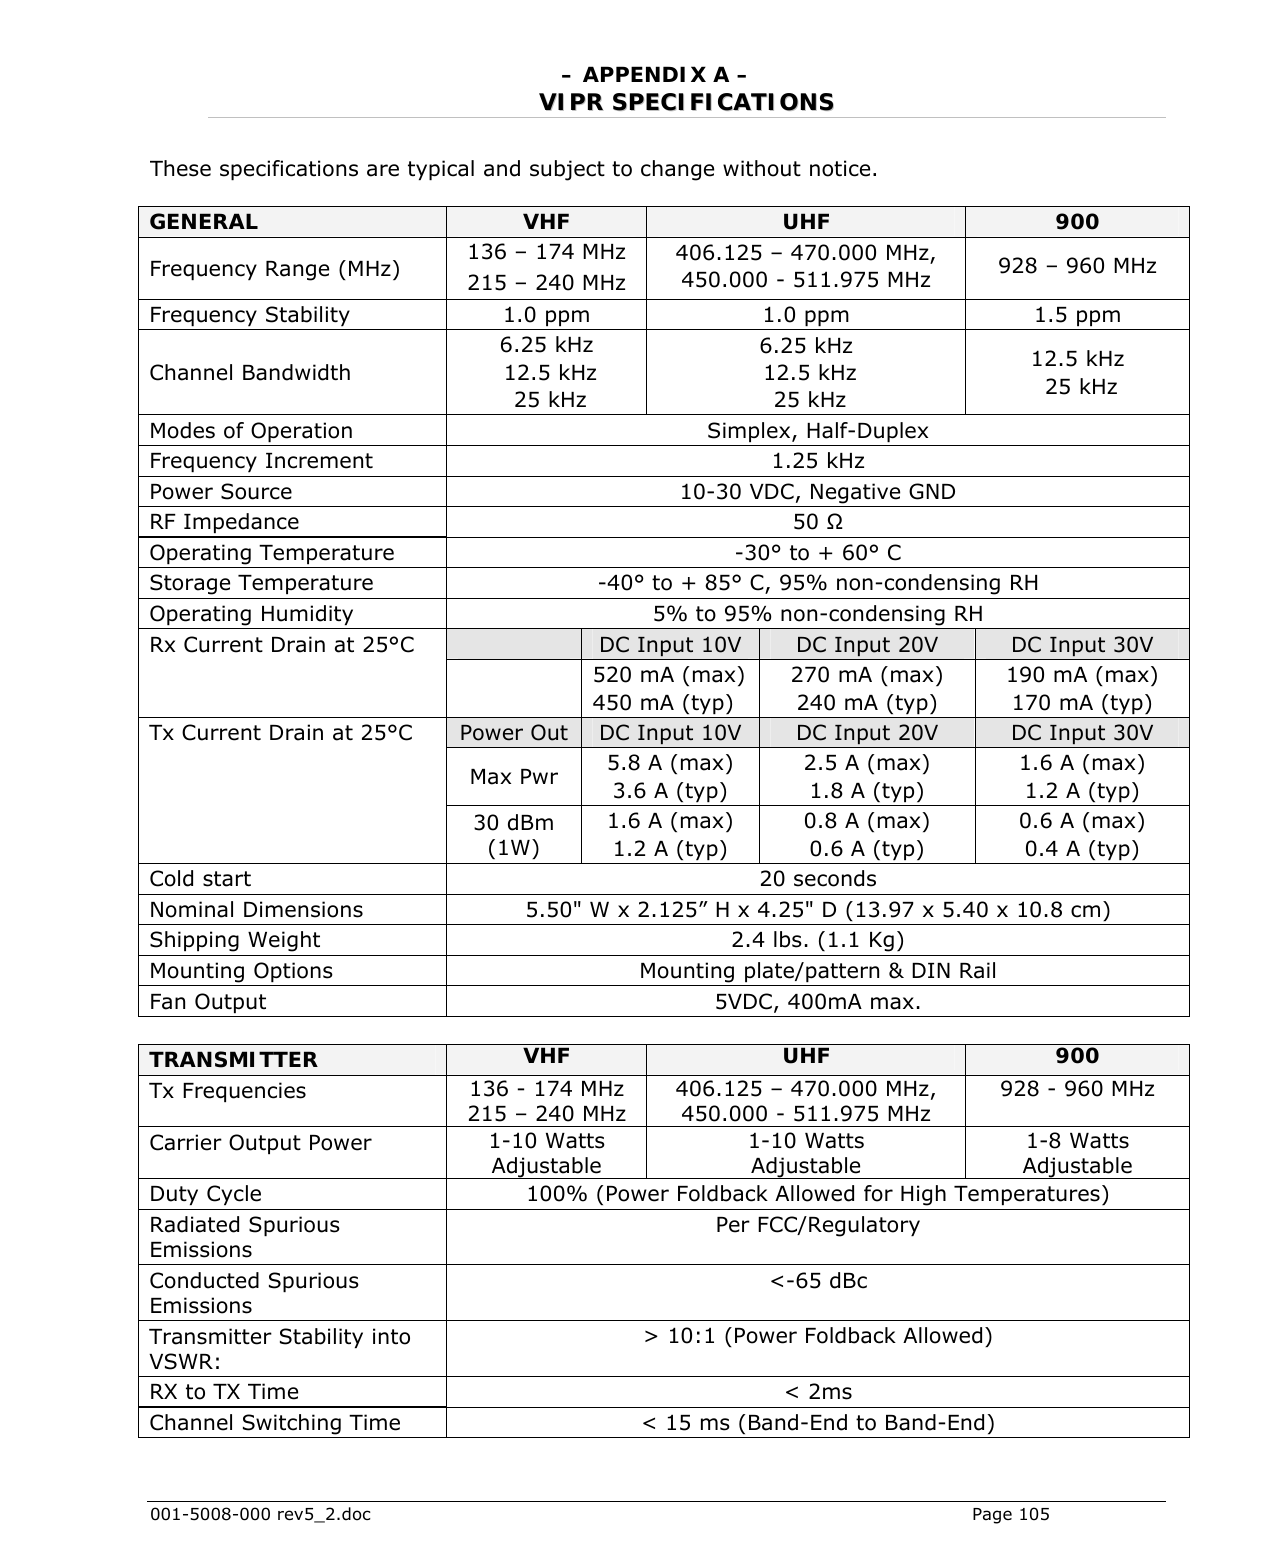  001-5008-000 rev5_2.doc    Page 105 – APPENDIX A – VVIIPPRR  SSPPEECCIIFFIICCAATTIIOONNSS  These specifications are typical and subject to change without notice.  GENERAL  VHF  UHF  900 Frequency Range (MHz)  136 – 174 MHz 215 – 240 MHz 406.125 – 470.000 MHz, 450.000 - 511.975 MHz  928 – 960 MHz Frequency Stability  1.0 ppm  1.0 ppm  1.5 ppm Channel Bandwidth 6.25 kHz  12.5 kHz  25 kHz 6.25 kHz  12.5 kHz  25 kHz 12.5 kHz  25 kHz Modes of Operation   Simplex, Half-Duplex Frequency Increment  1.25 kHz Power Source  10-30 VDC, Negative GND RF Impedance   50 Ω Operating Temperature   -30° to + 60° C Storage Temperature  -40° to + 85° C, 95% non-condensing RH Operating Humidity   5% to 95% non-condensing RH Rx Current Drain at 25°C    DC Input 10V  DC Input 20V  DC Input 30V   520 mA (max) 450 mA (typ) 270 mA (max) 240 mA (typ) 190 mA (max) 170 mA (typ) Tx Current Drain at 25°C  Power Out DC Input 10V  DC Input 20V  DC Input 30V  Max Pwr  5.8 A (max) 3.6 A (typ) 2.5 A (max) 1.8 A (typ) 1.6 A (max) 1.2 A (typ)  30 dBm (1W) 1.6 A (max) 1.2 A (typ) 0.8 A (max) 0.6 A (typ) 0.6 A (max) 0.4 A (typ) Cold start  20 seconds Nominal Dimensions   5.50&quot; W x 2.125” H x 4.25&quot; D (13.97 x 5.40 x 10.8 cm) Shipping Weight  2.4 lbs. (1.1 Kg) Mounting Options  Mounting plate/pattern &amp; DIN Rail Fan Output  5VDC, 400mA max.  TRANSMITTER  VHF  UHF  900 Tx Frequencies  136 - 174 MHz 215 – 240 MHz 406.125 – 470.000 MHz,  450.000 - 511.975 MHz 928 - 960 MHz Carrier Output Power  1-10 Watts Adjustable 1-10 Watts Adjustable 1-8 Watts Adjustable Duty Cycle  100% (Power Foldback Allowed for High Temperatures) Radiated Spurious Emissions Per FCC/Regulatory Conducted Spurious Emissions &lt;-65 dBc Transmitter Stability into VSWR: &gt; 10:1 (Power Foldback Allowed) RX to TX Time  &lt; 2ms Channel Switching Time  &lt; 15 ms (Band-End to Band-End) 